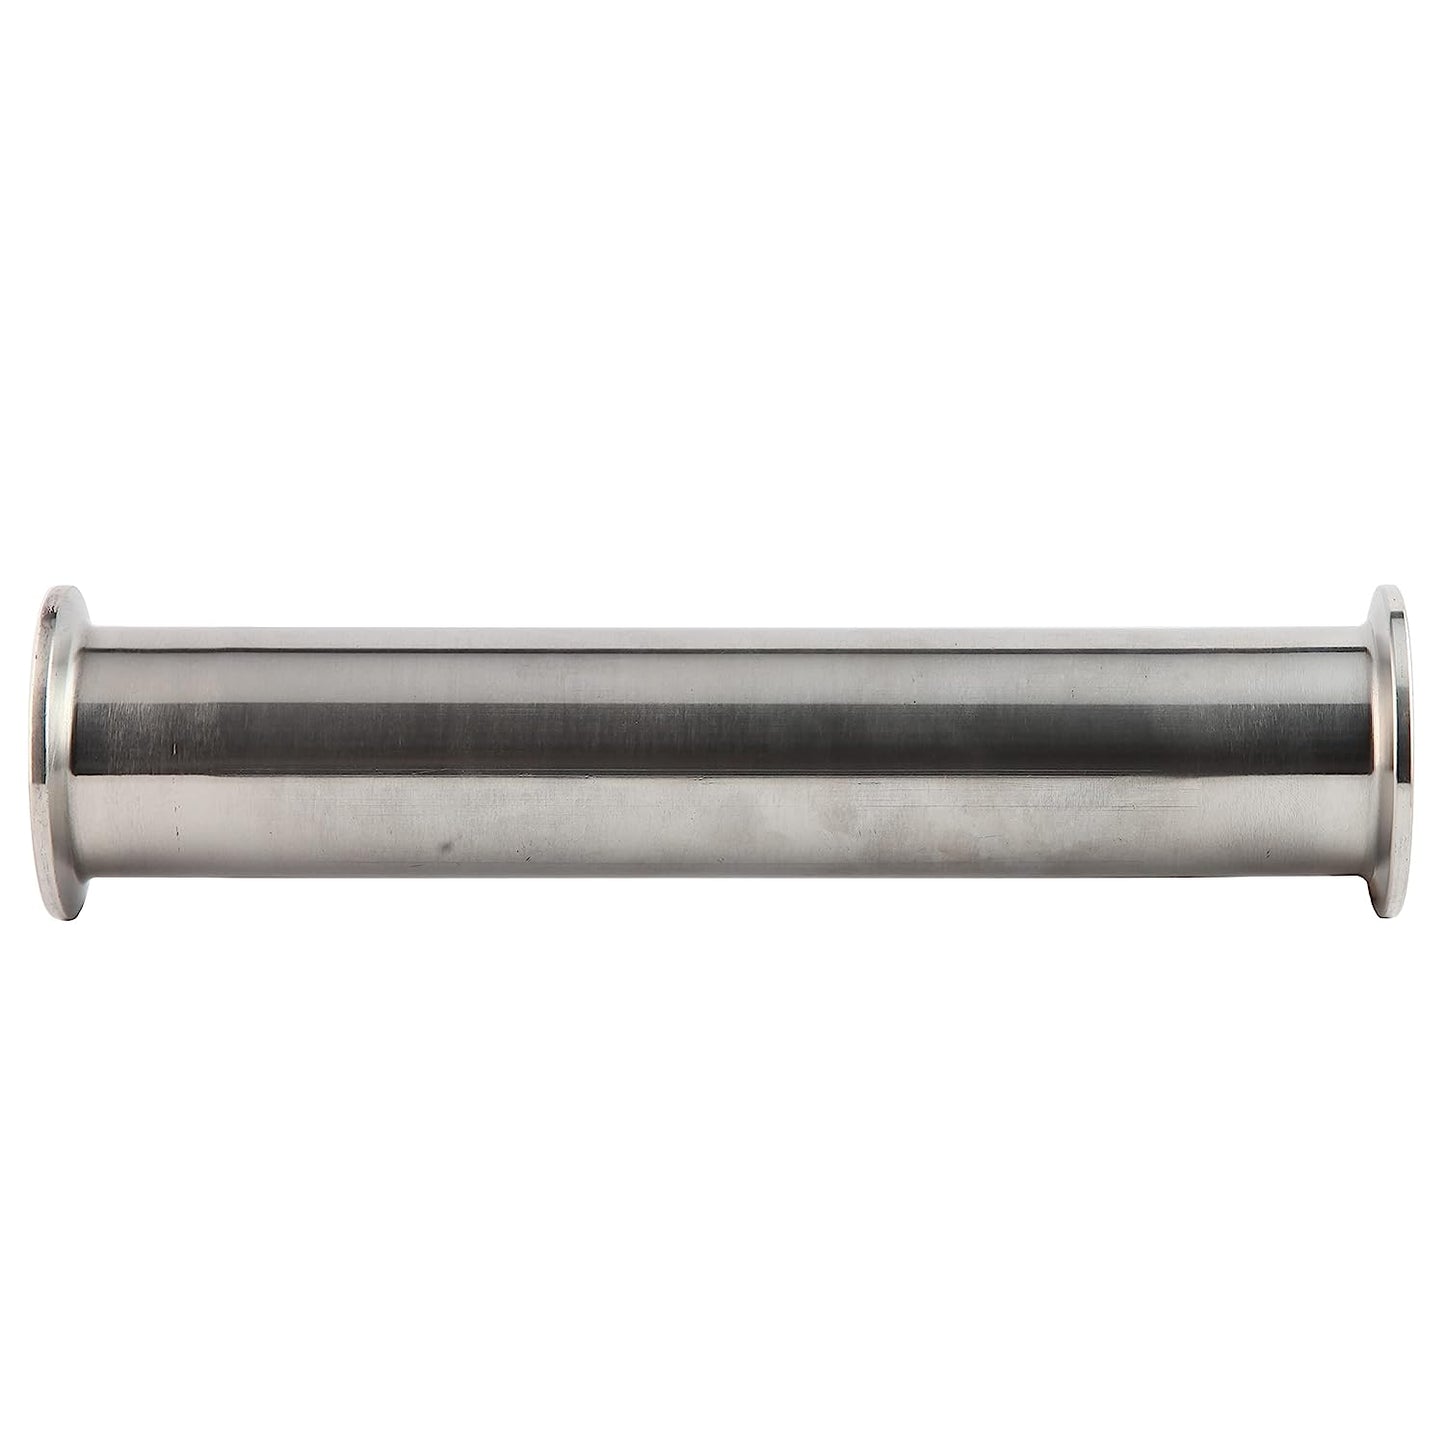 1.5" Clamped Spool Tube, Length 250 mm